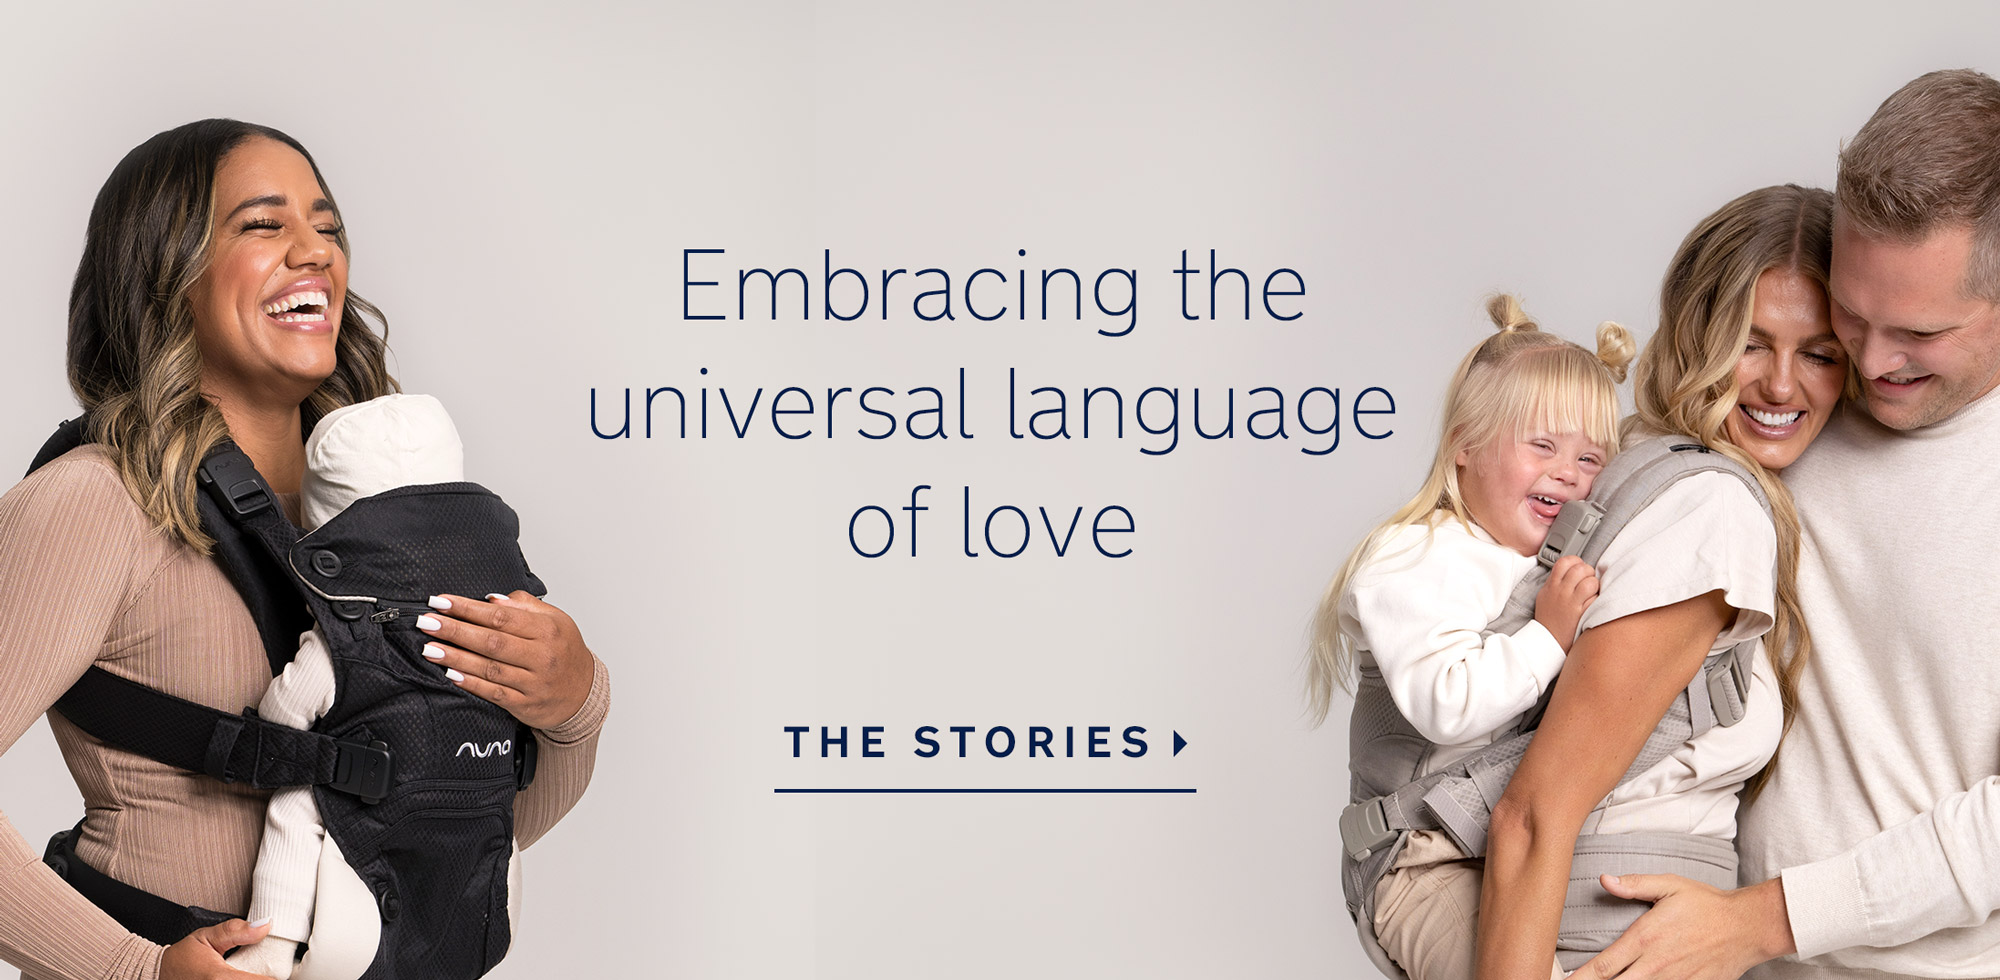 Nuna CUDL, Embracing the universal language of love. READ THE STORIES